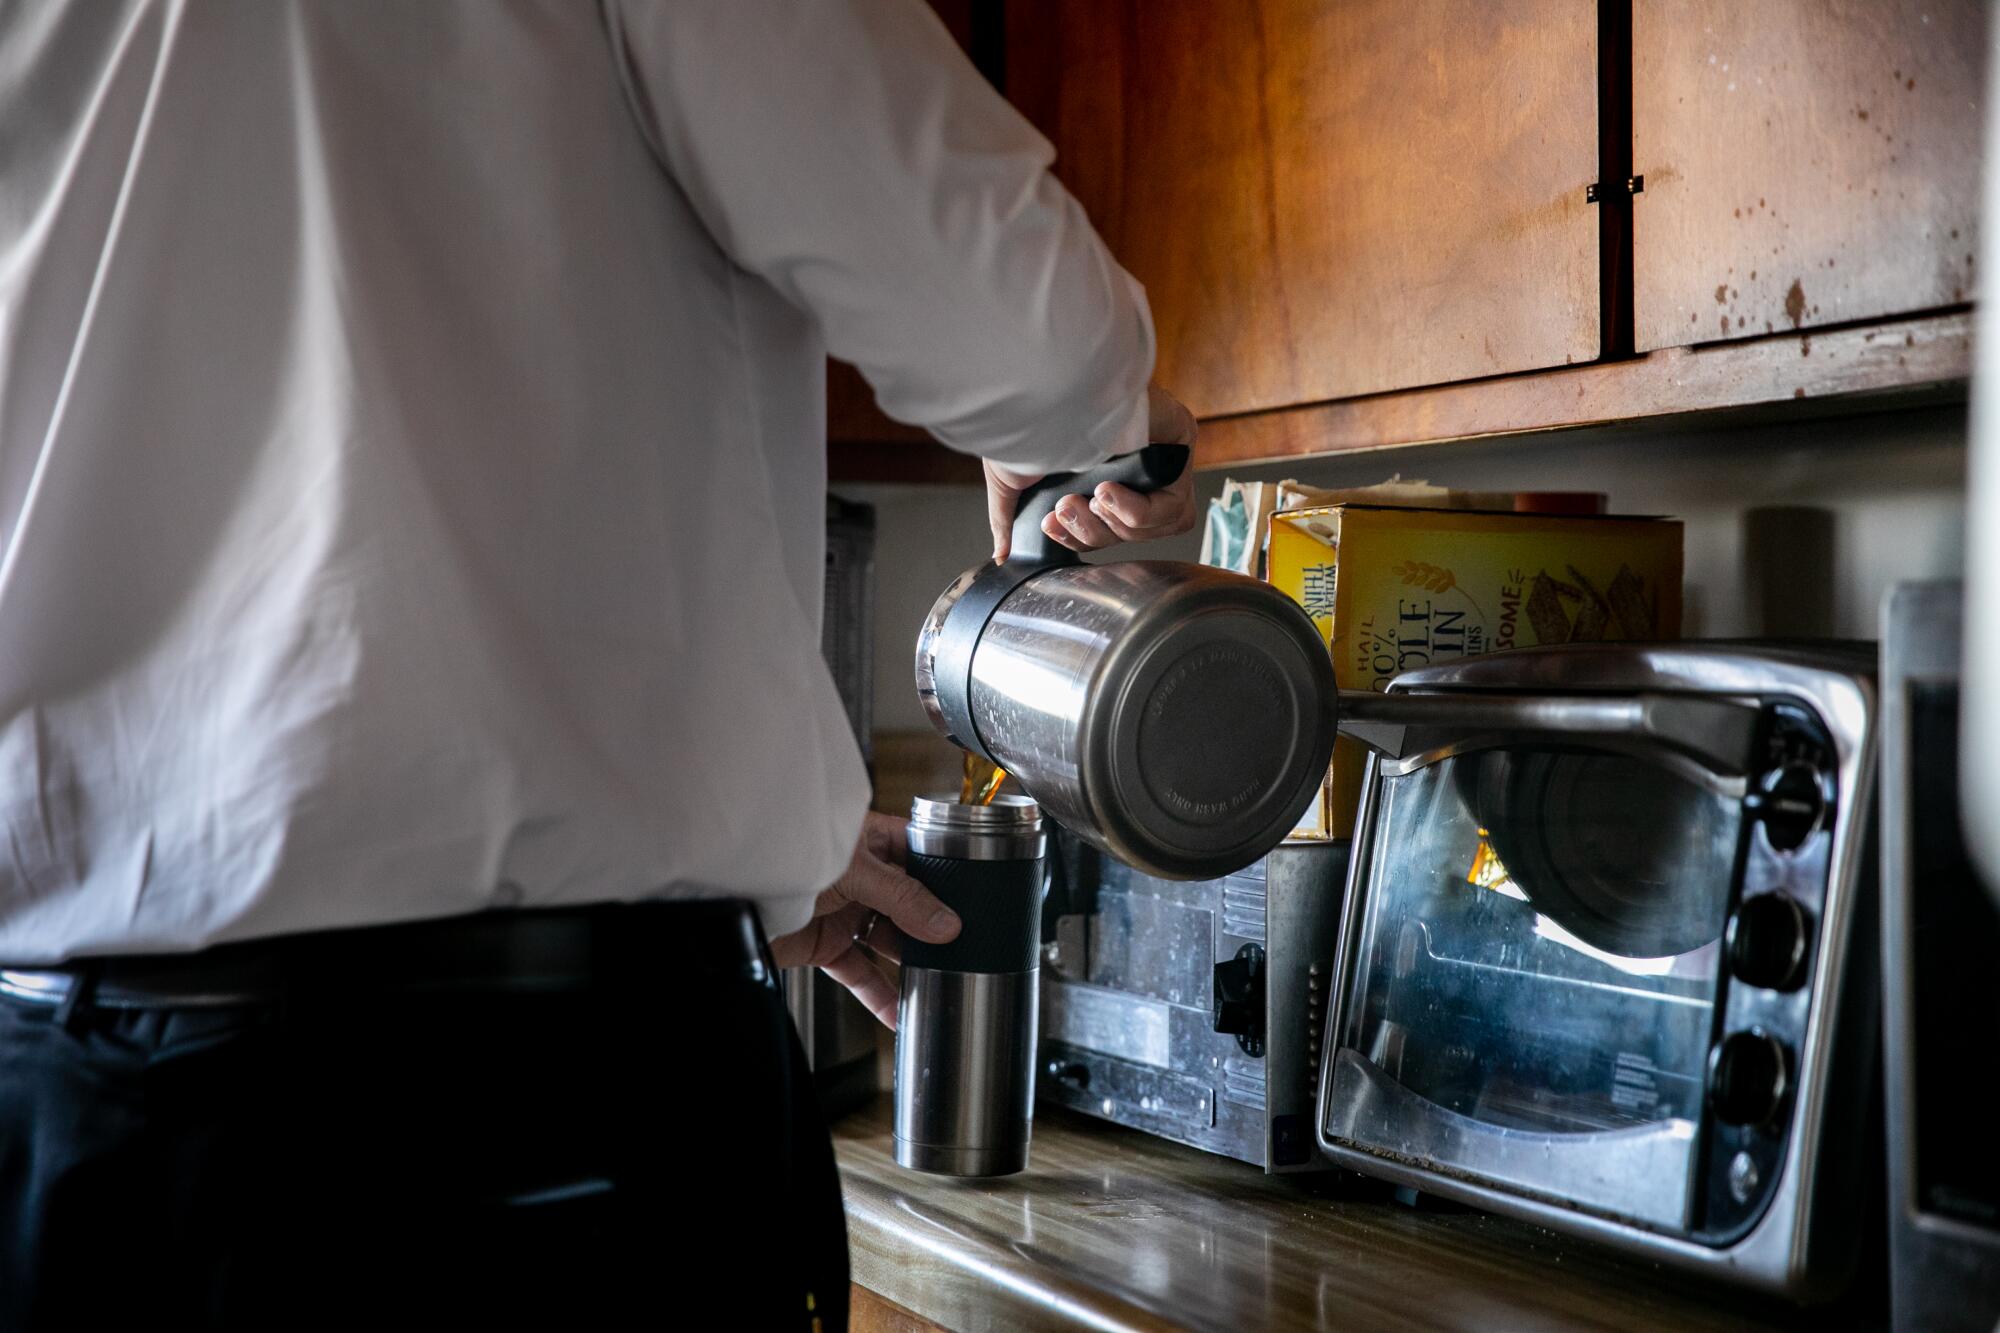 Robert Zakar pours himself a cup of coffee as he starts another long day of work on Wednesday.